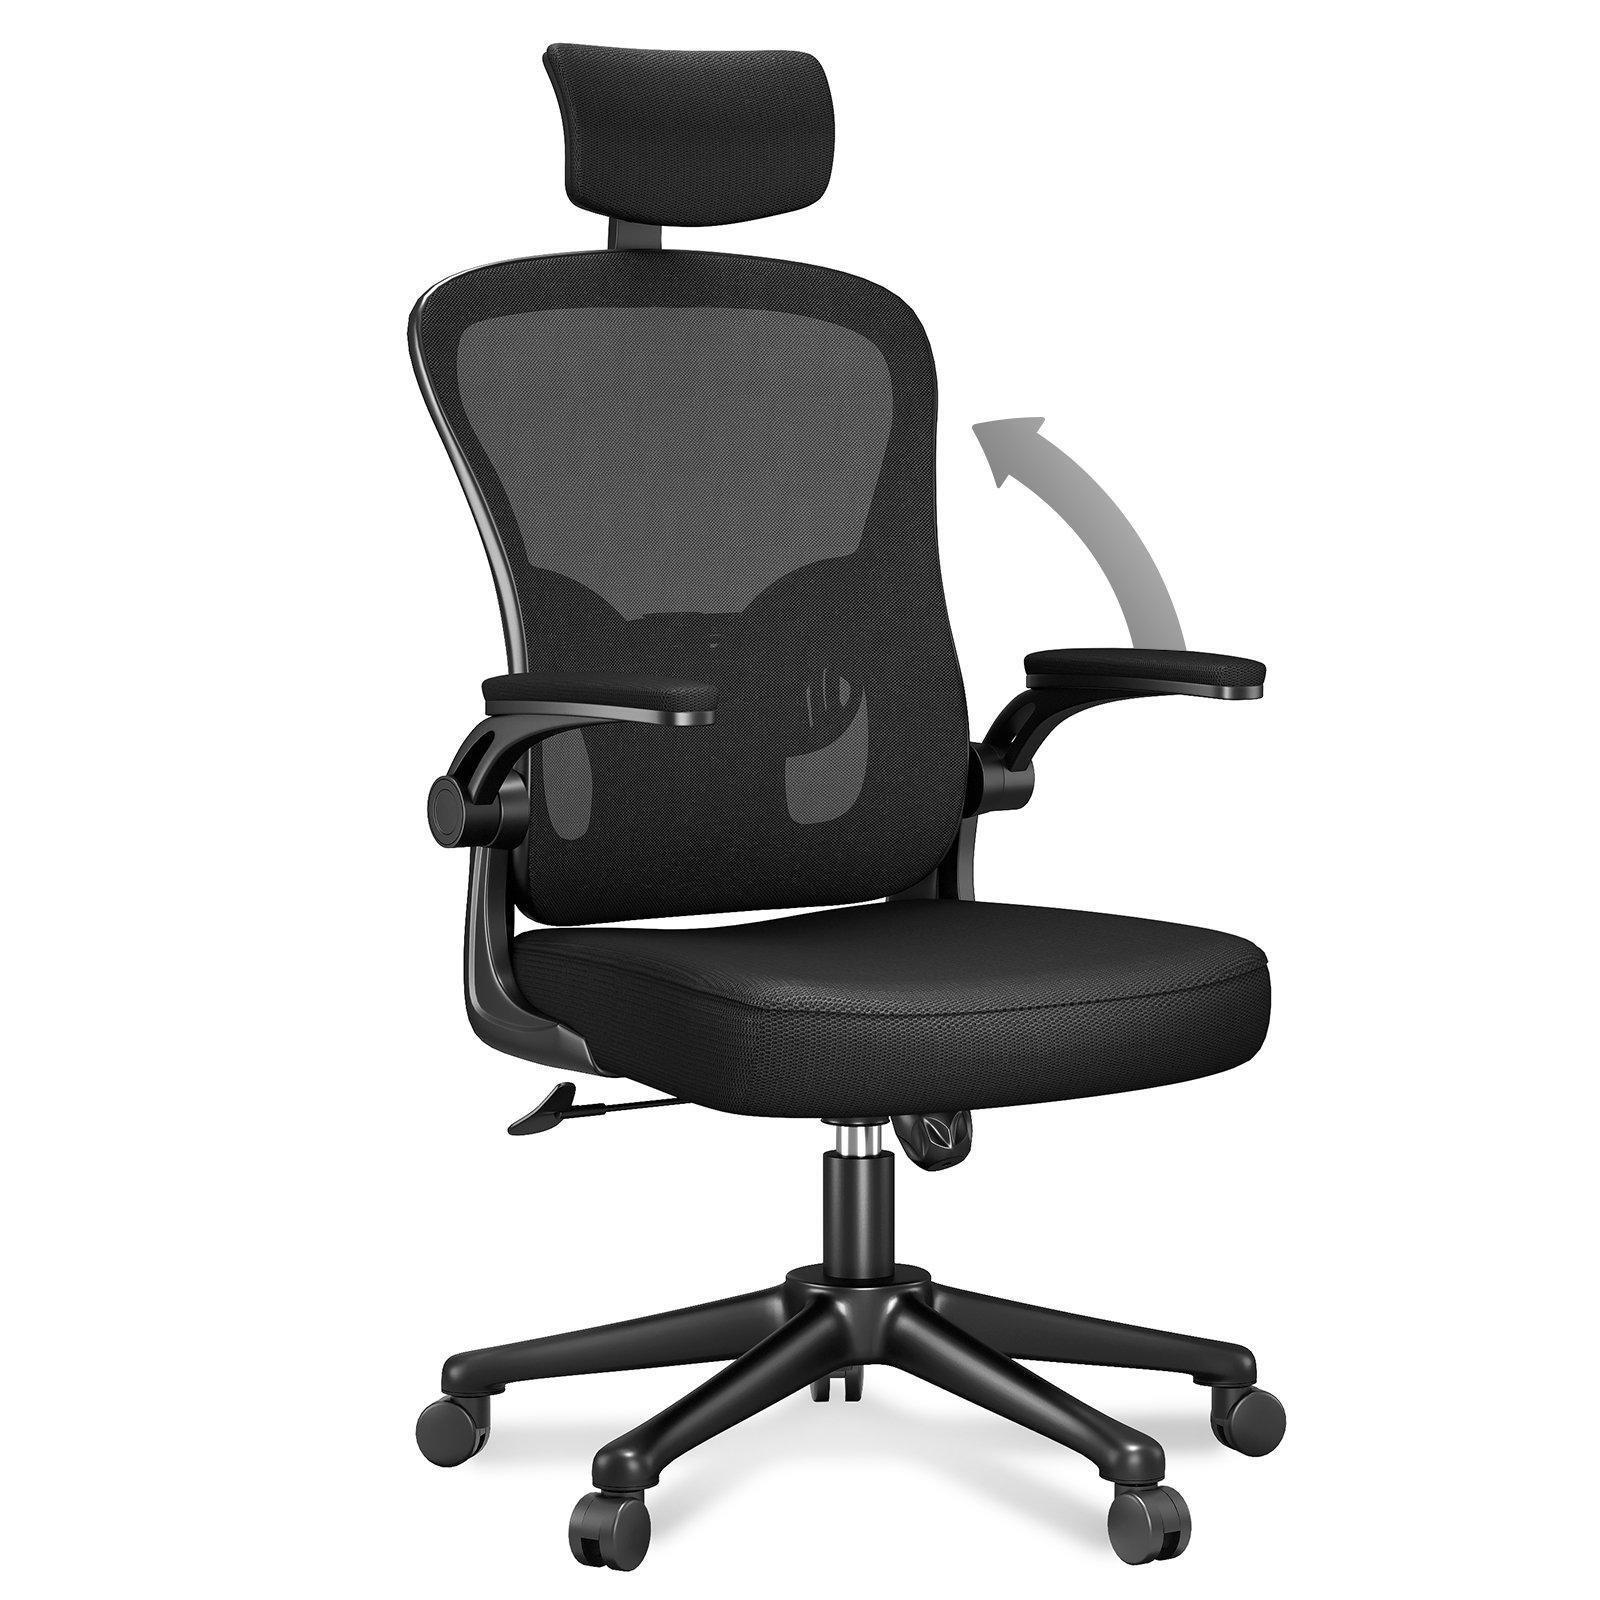 Ergonomic Office Chair with Headrest and Adjustable Armrests - image 1